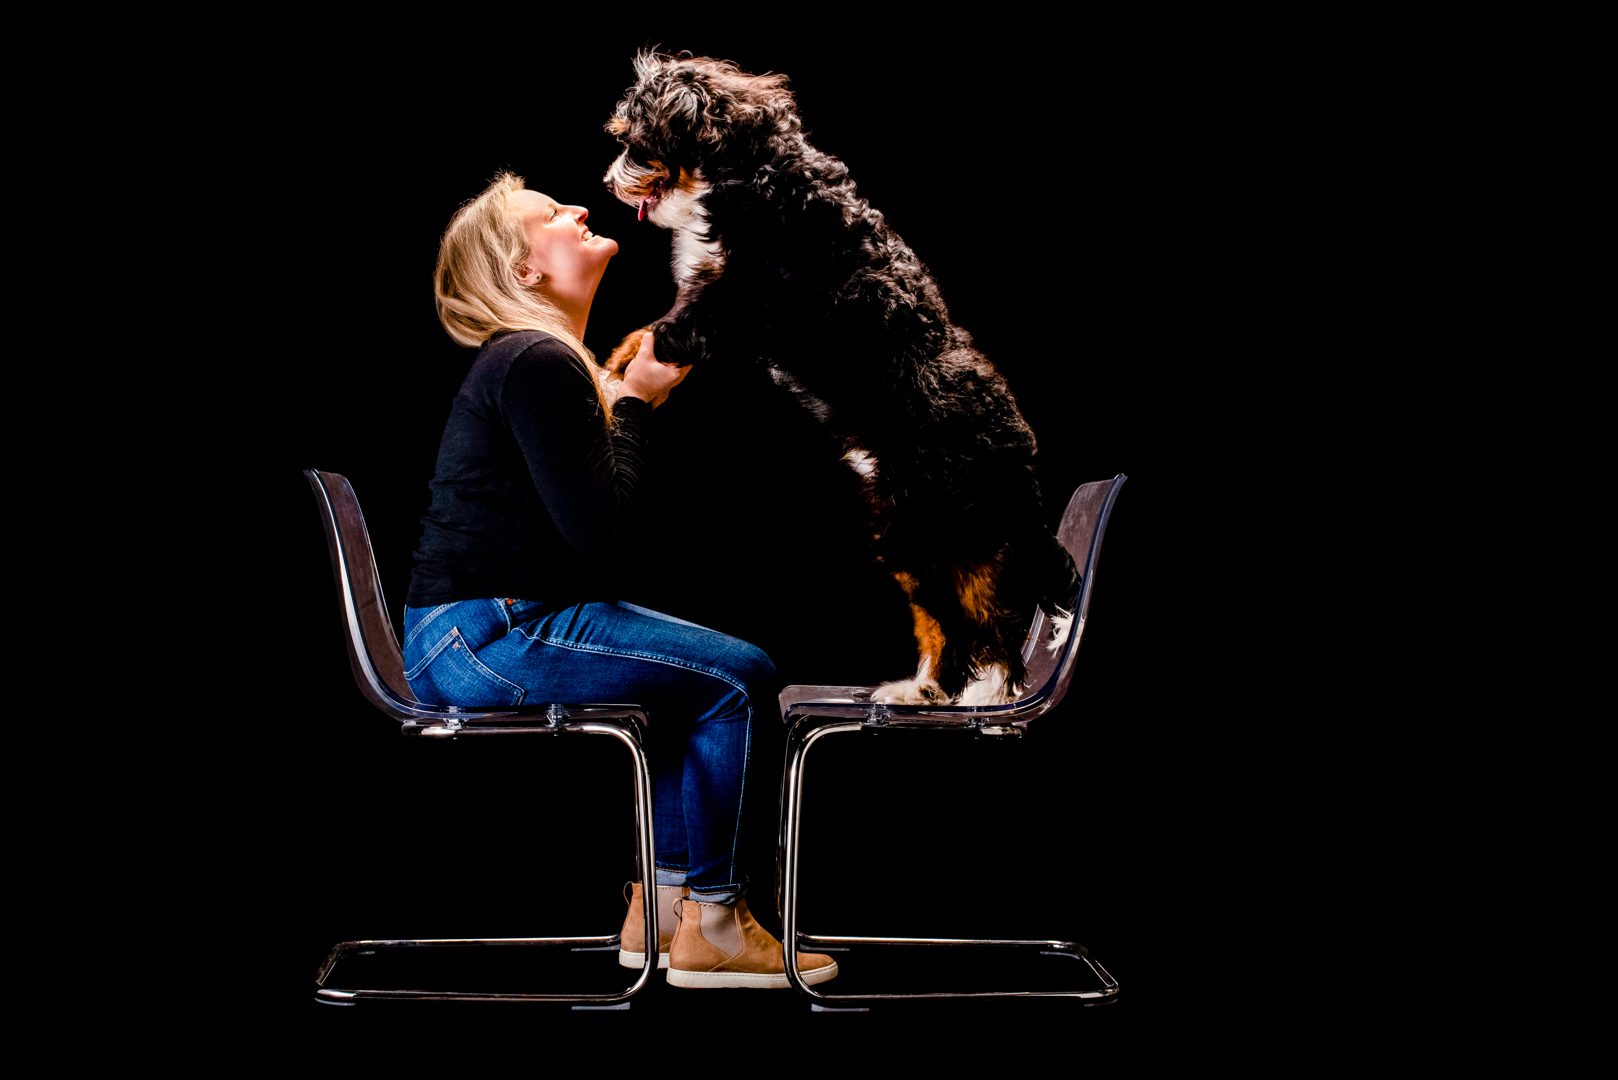 Chicago Dog Photographer, Cusic Photo, captures families and dogs together in her Chicago studio. Image of woman with blond hair, jeans and a black shirt holding hands / paws with fluffy black and white dog.